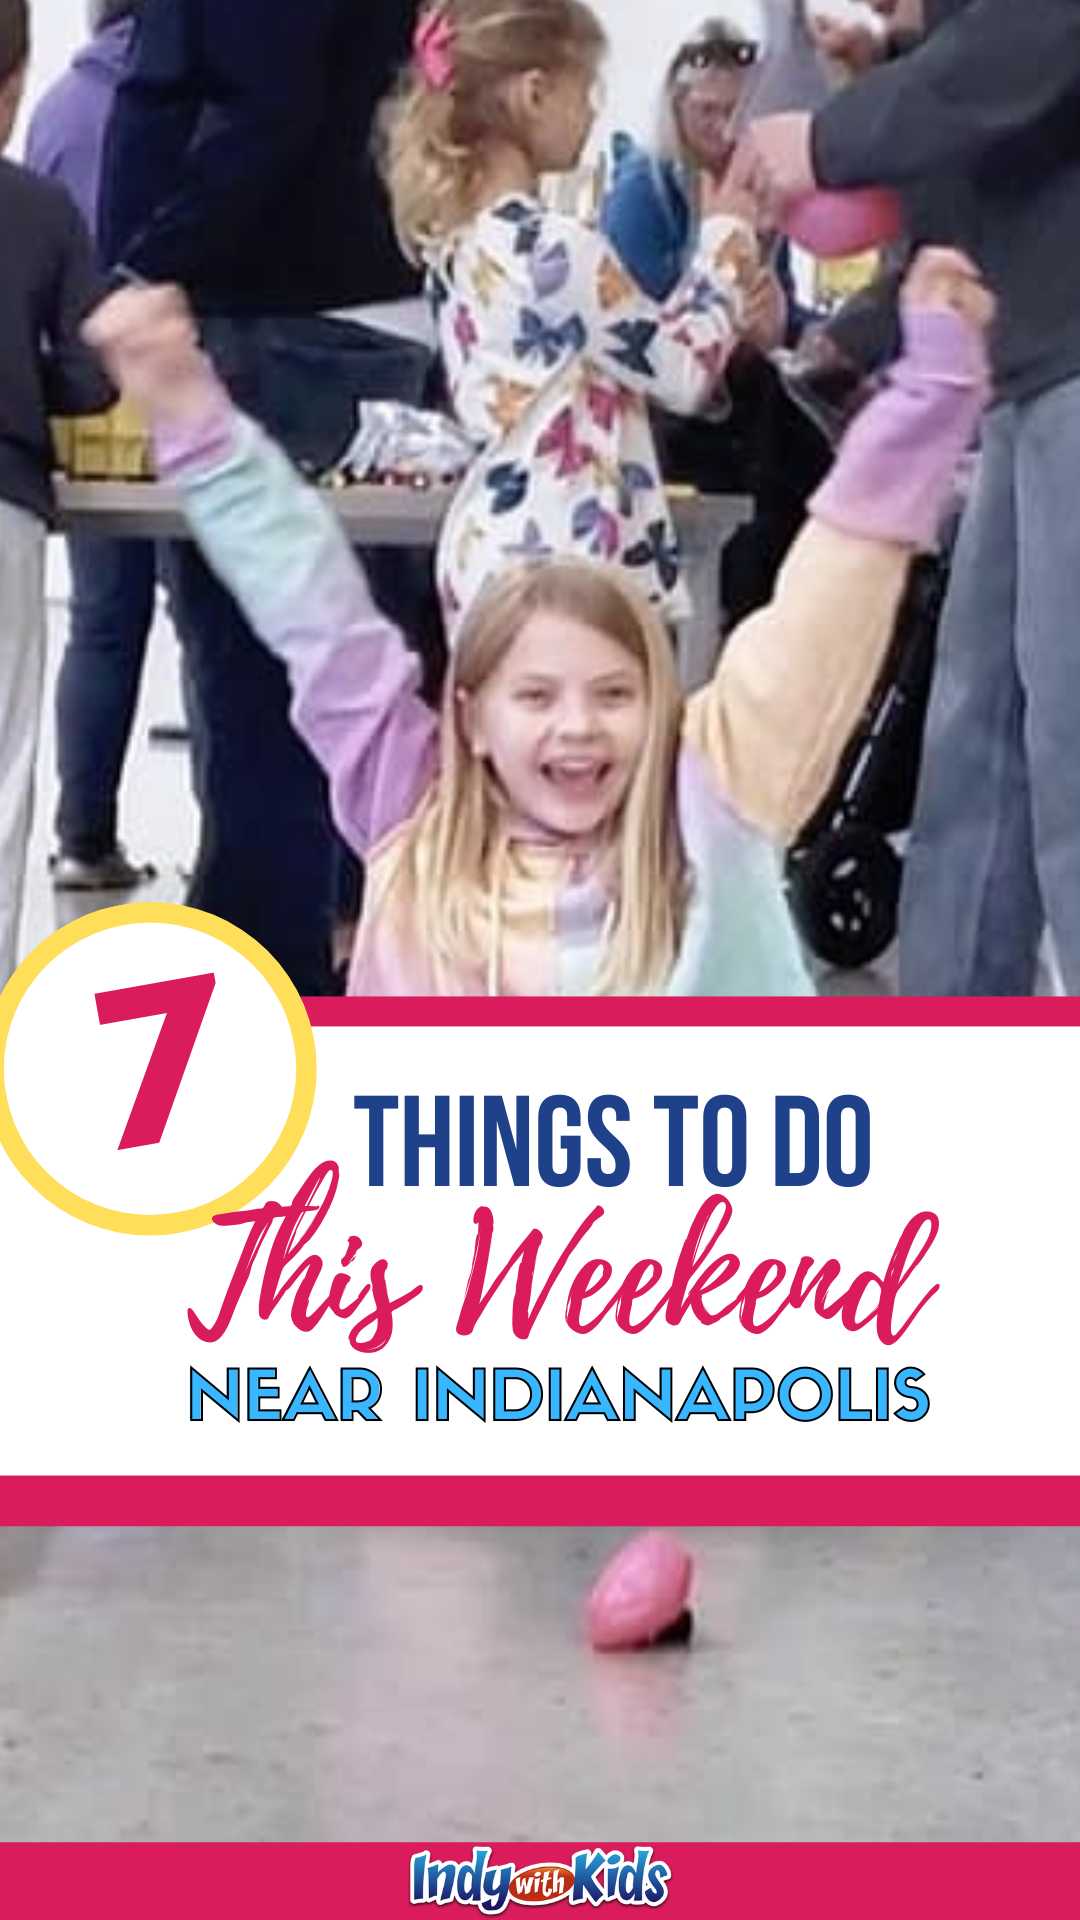 Things to do this weekend